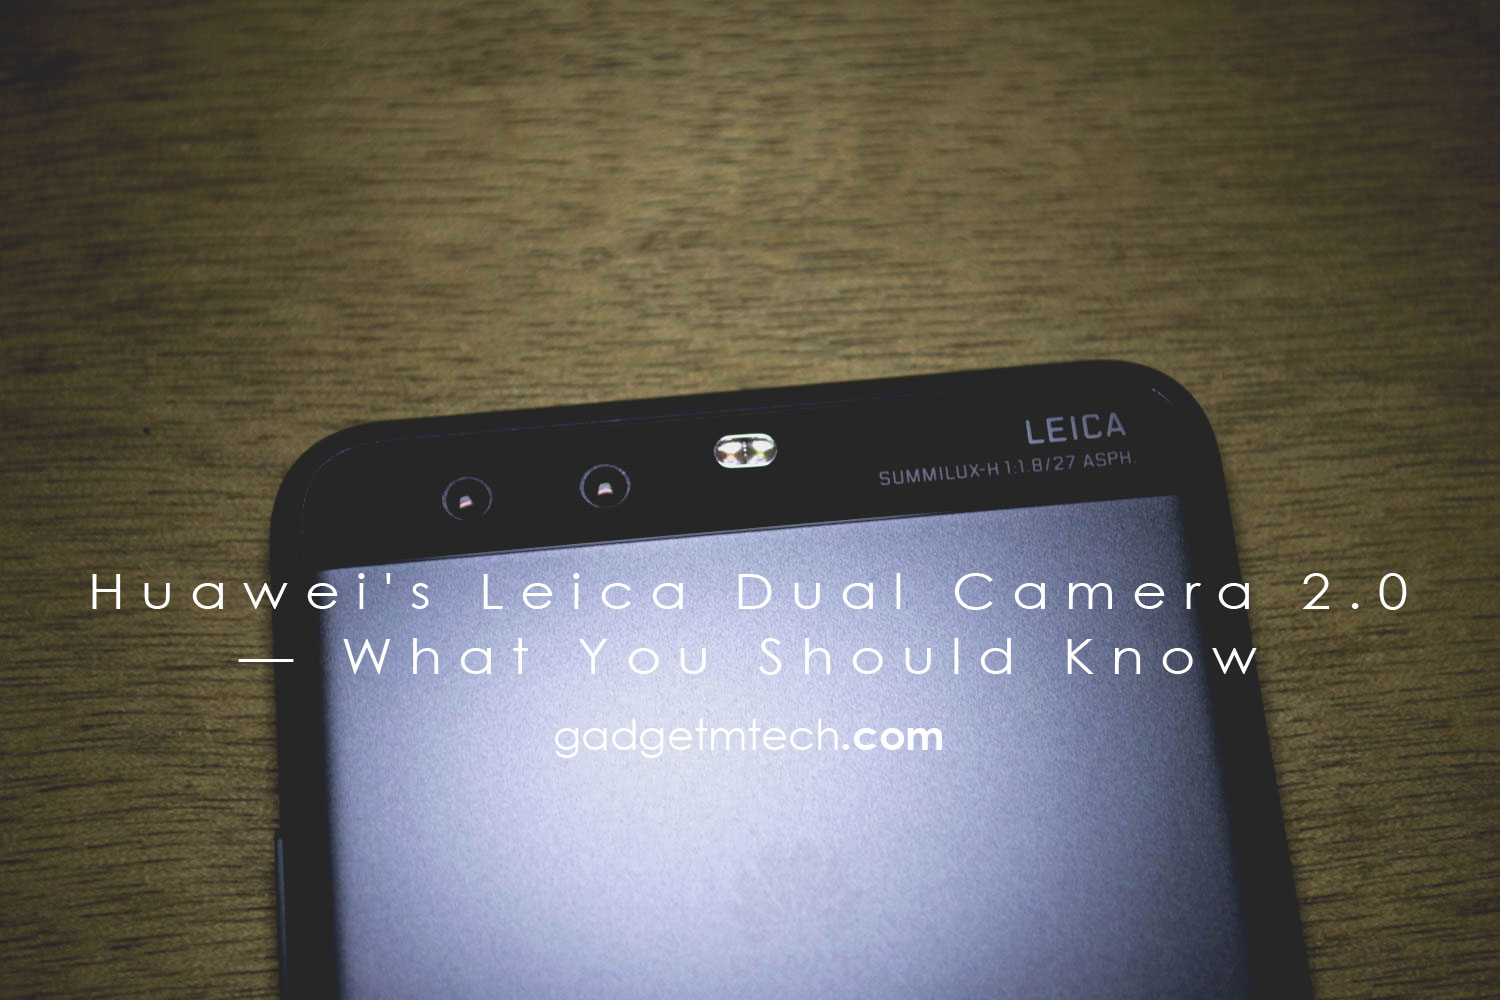 Huawei’s Leica Dual Camera 2.0 — What You Should Know